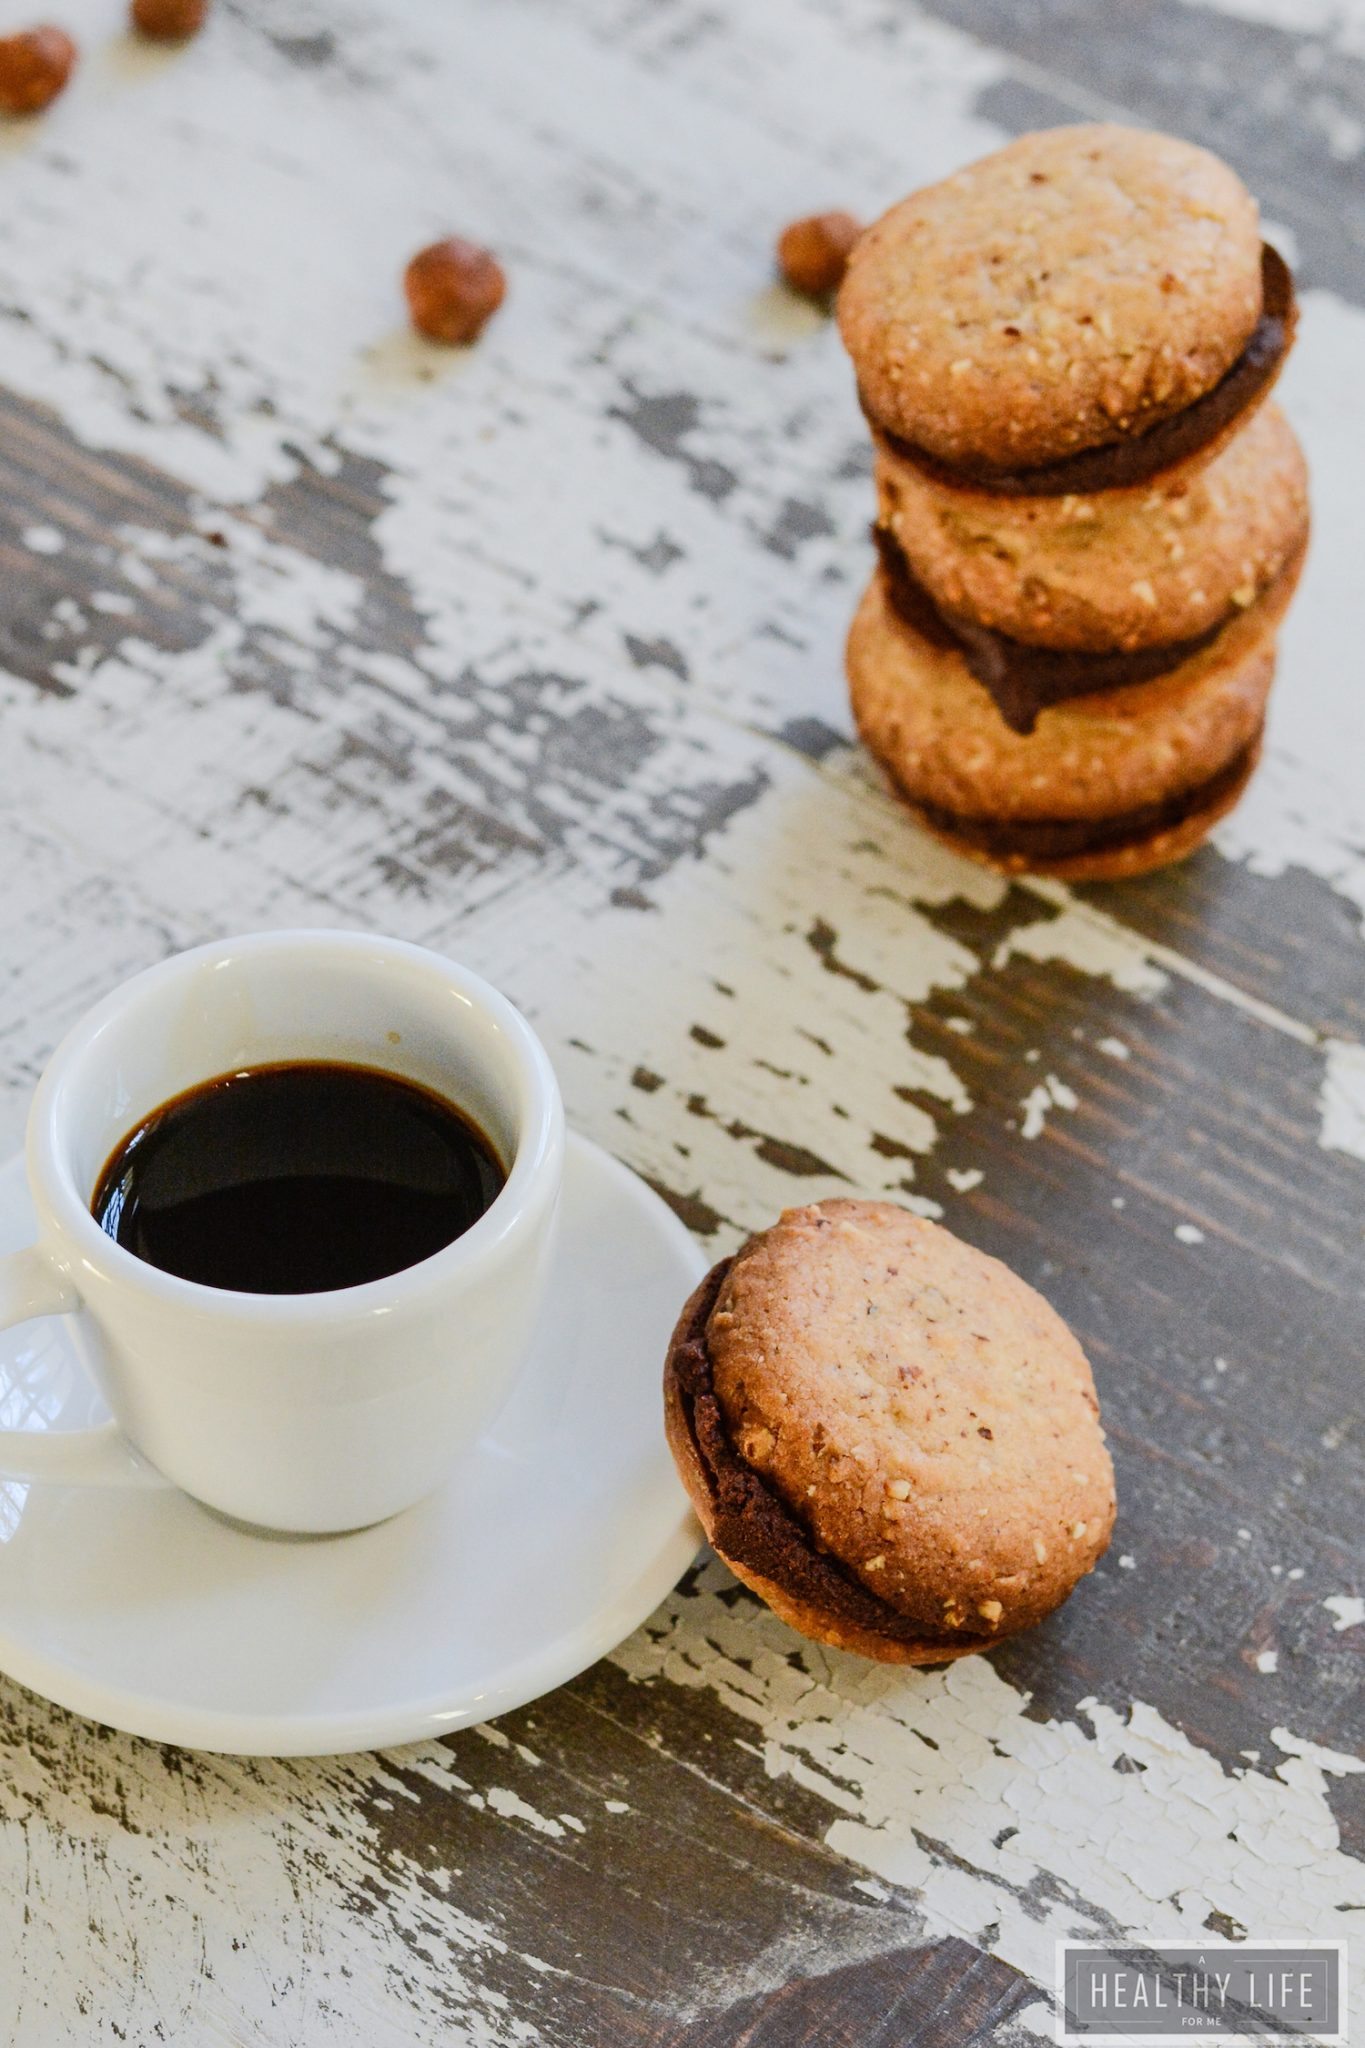 Hazelnut cookies with a cup of coffee on the side.